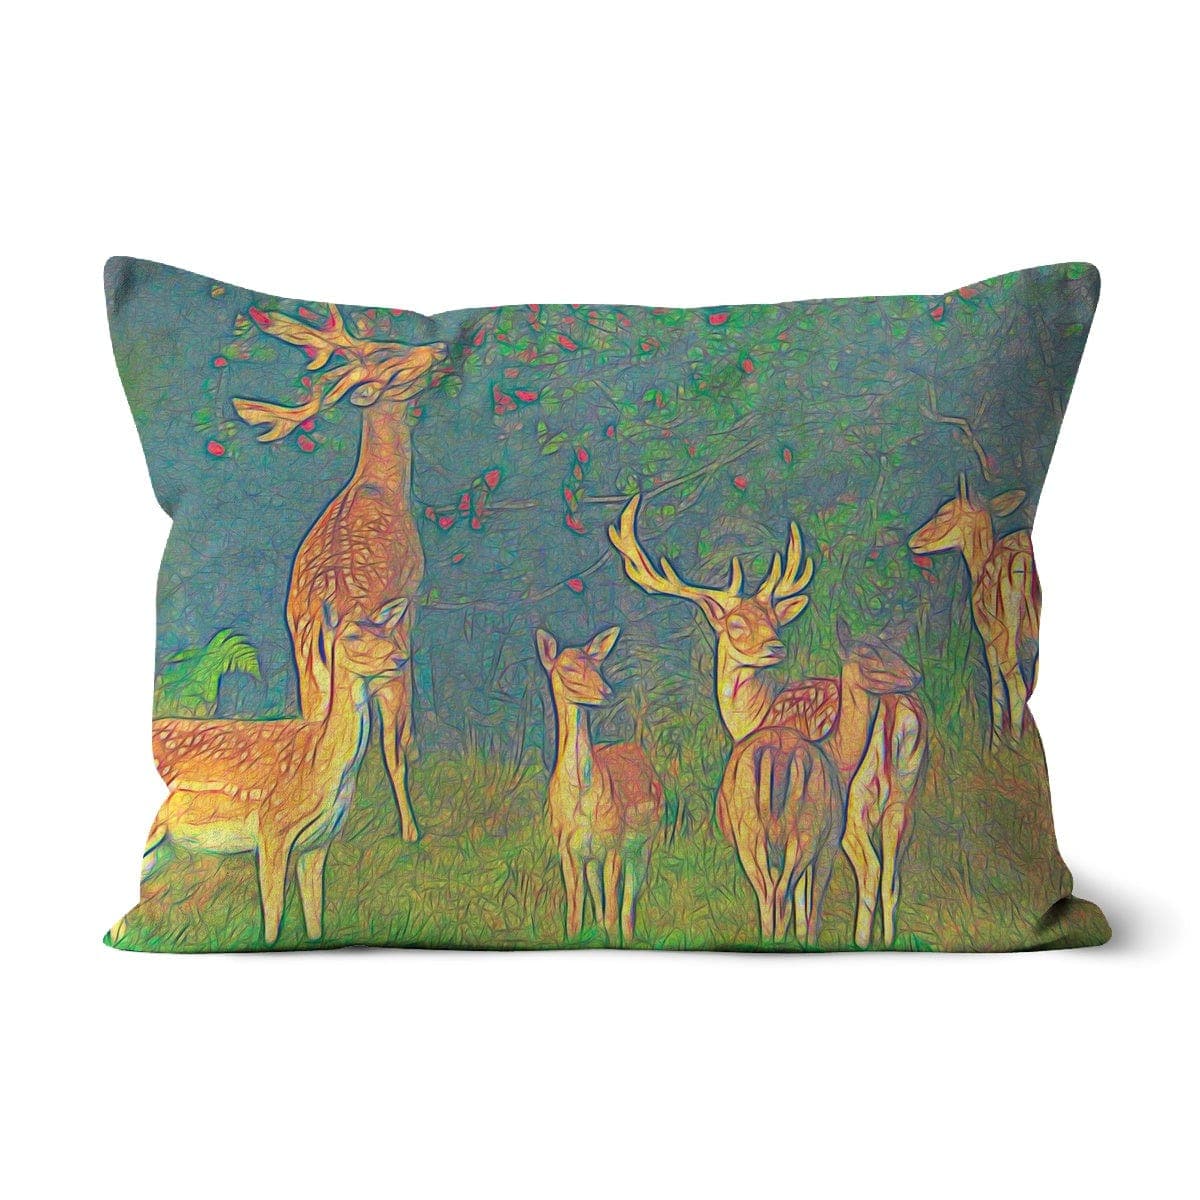 Deer pack in the forest, Cushion,by Ingrid hütten